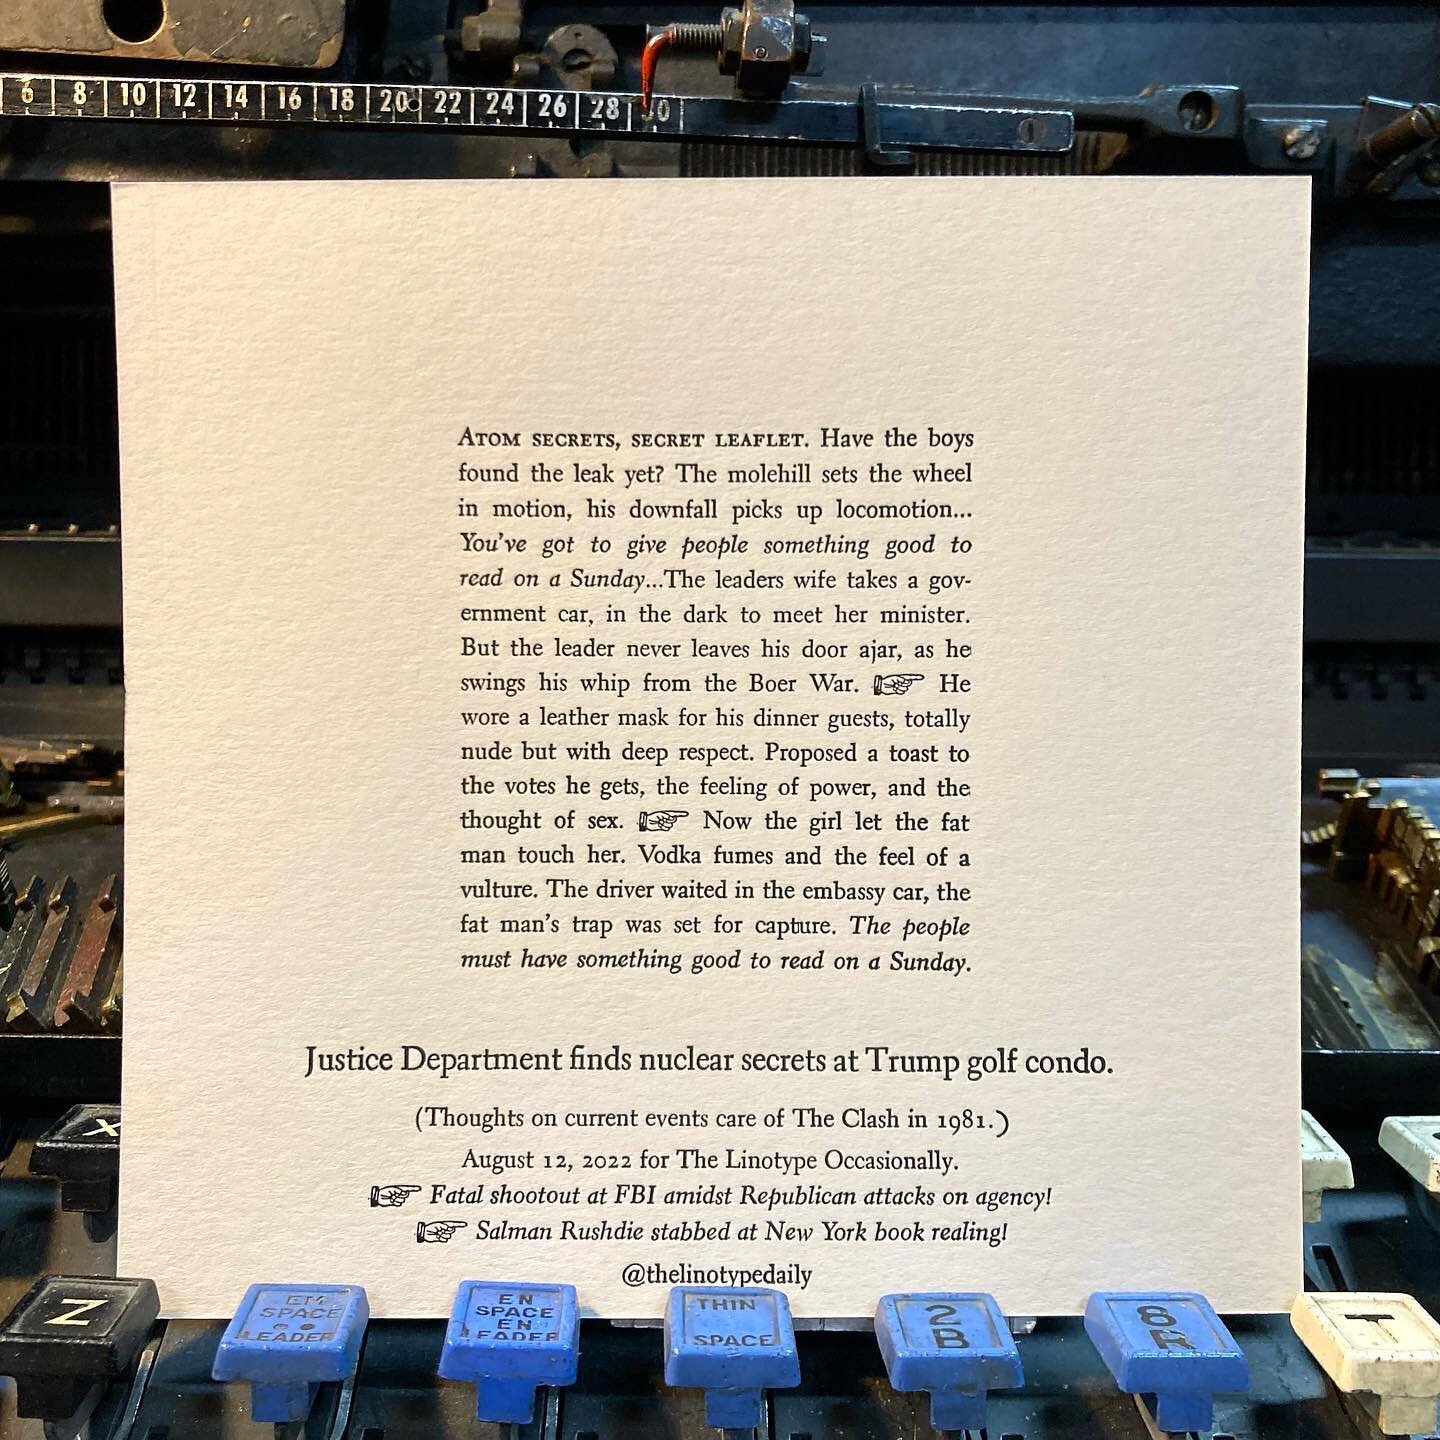 So, was he planning to sell (or has he already sold) access to top secret nuclear technology to the Russians, the Saudis ($2b to Jared), or China? (And apologies, since the story broke I cannot get that song out of my head!) #letterpress #linotype #t